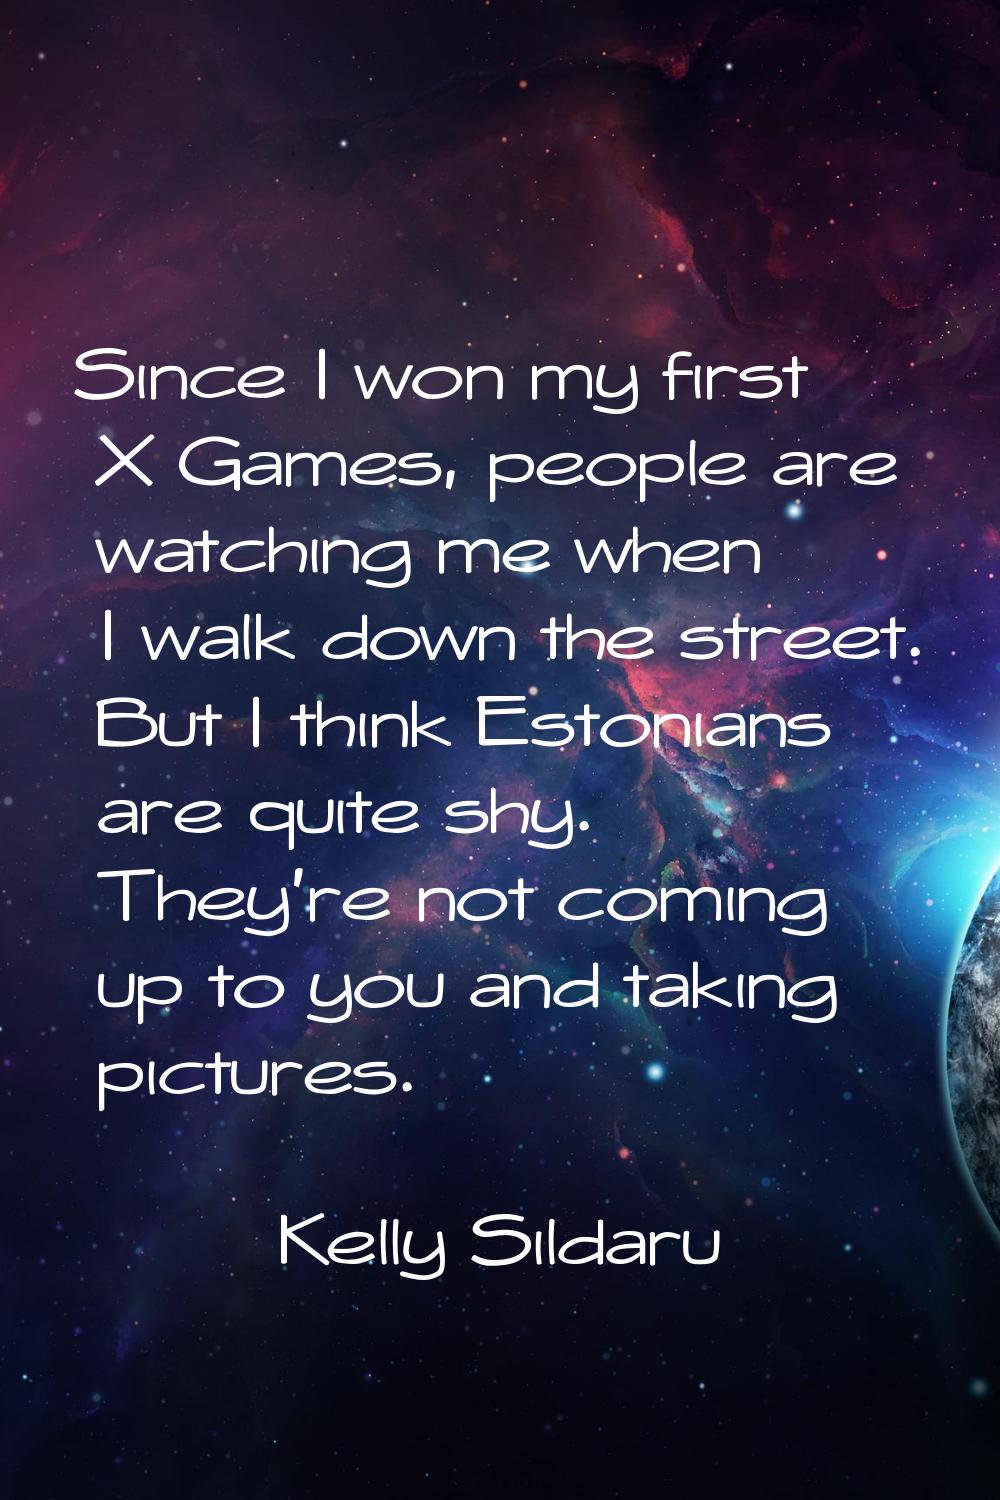 Since I won my first X Games, people are watching me when I walk down the street. But I think Eston